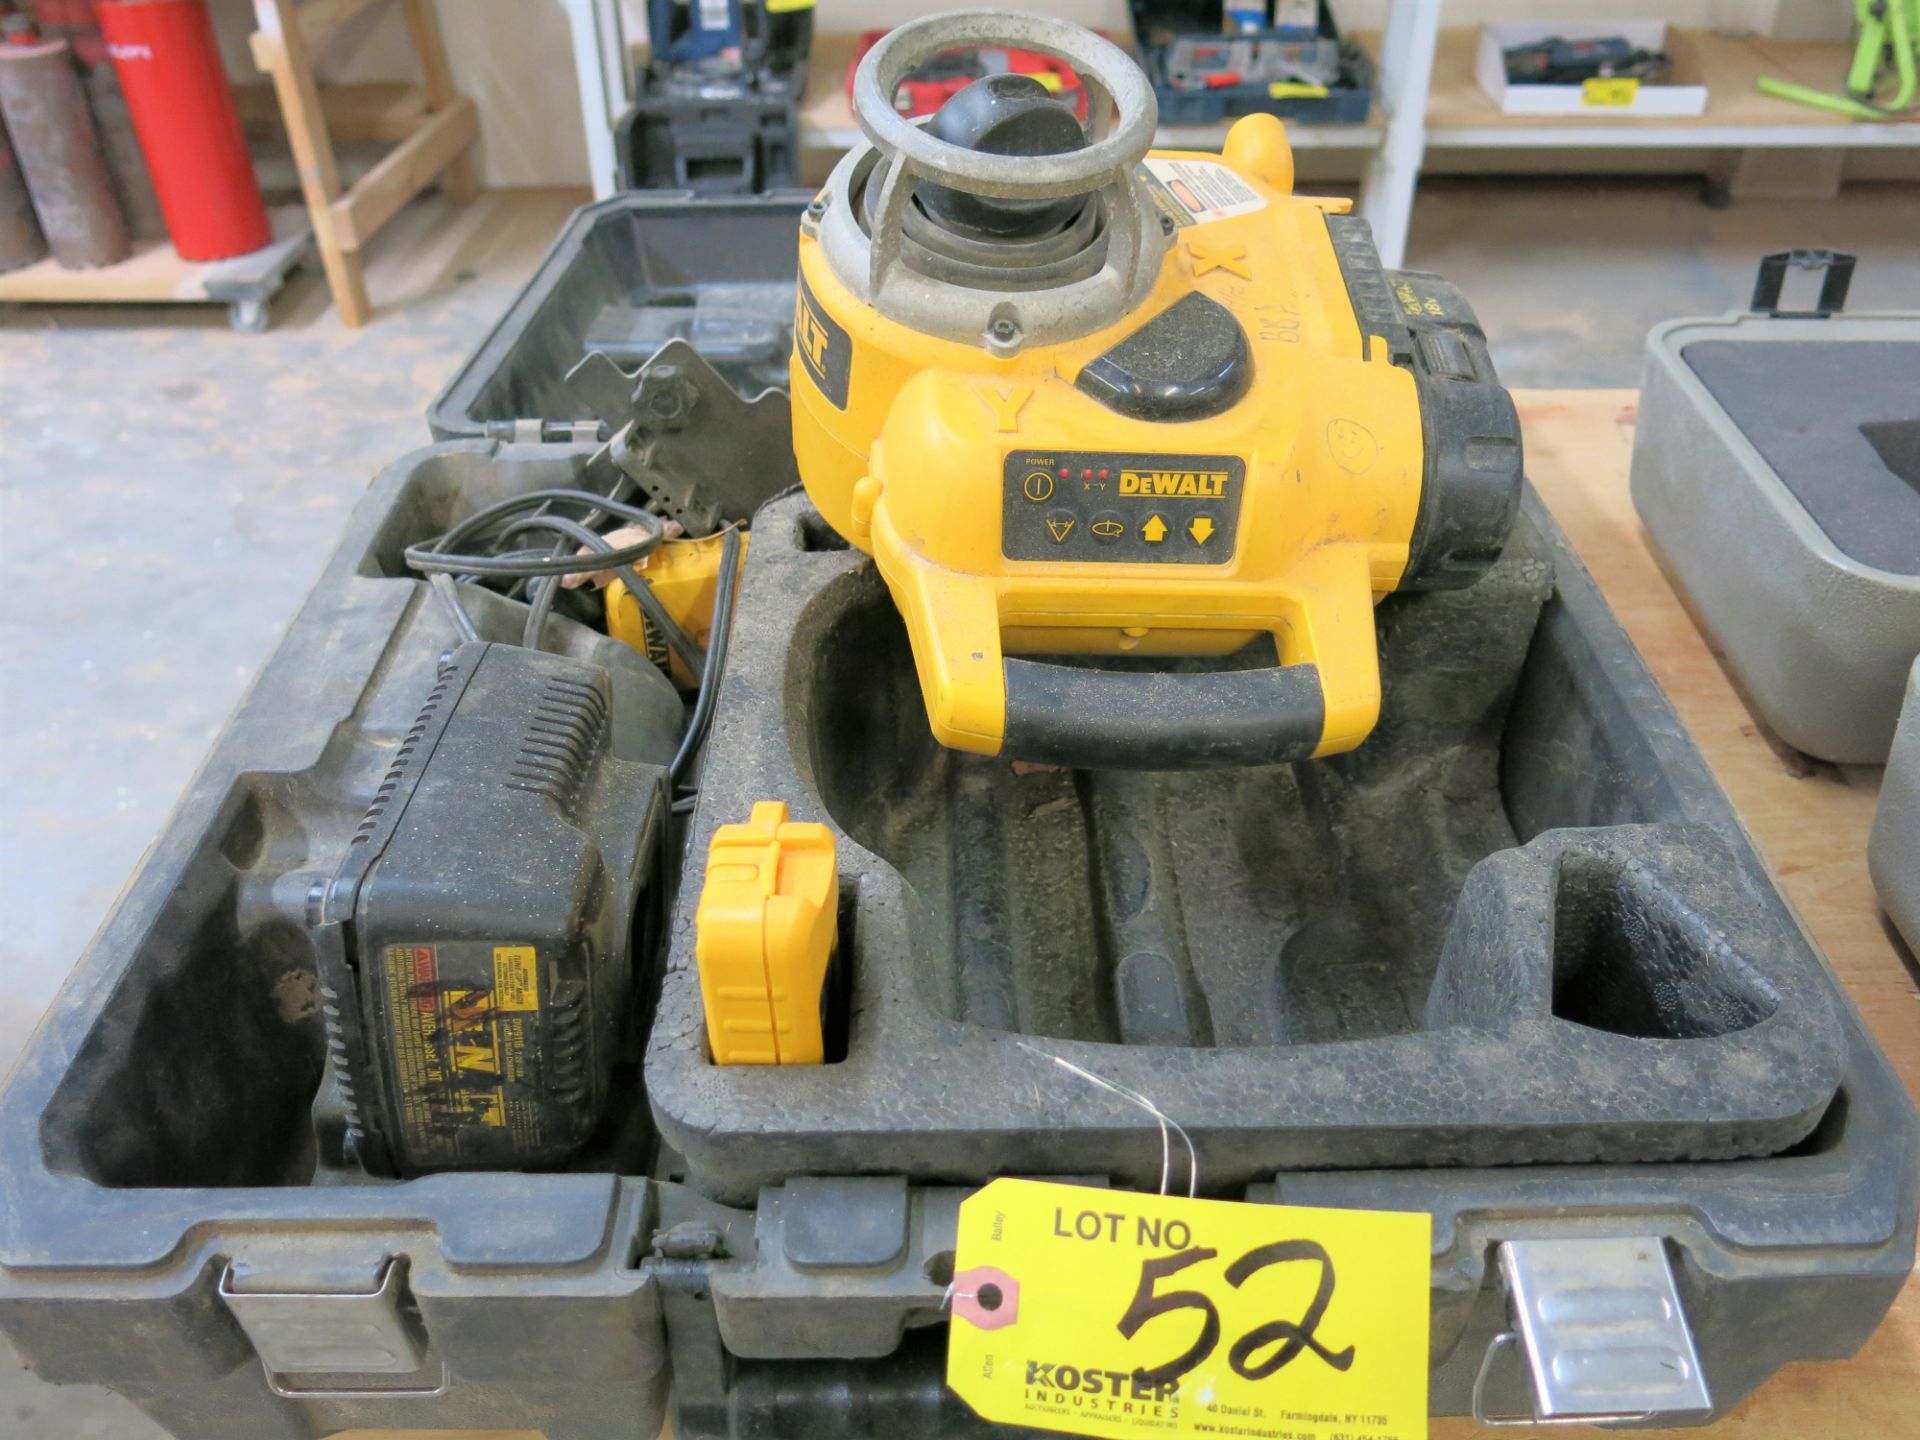 (1) DEWALT 18V ROTARY LASER LEVELING SYSTEM MDL. DW077 WITH REMOTE CONTROL, BATTERY CHARGER, AND